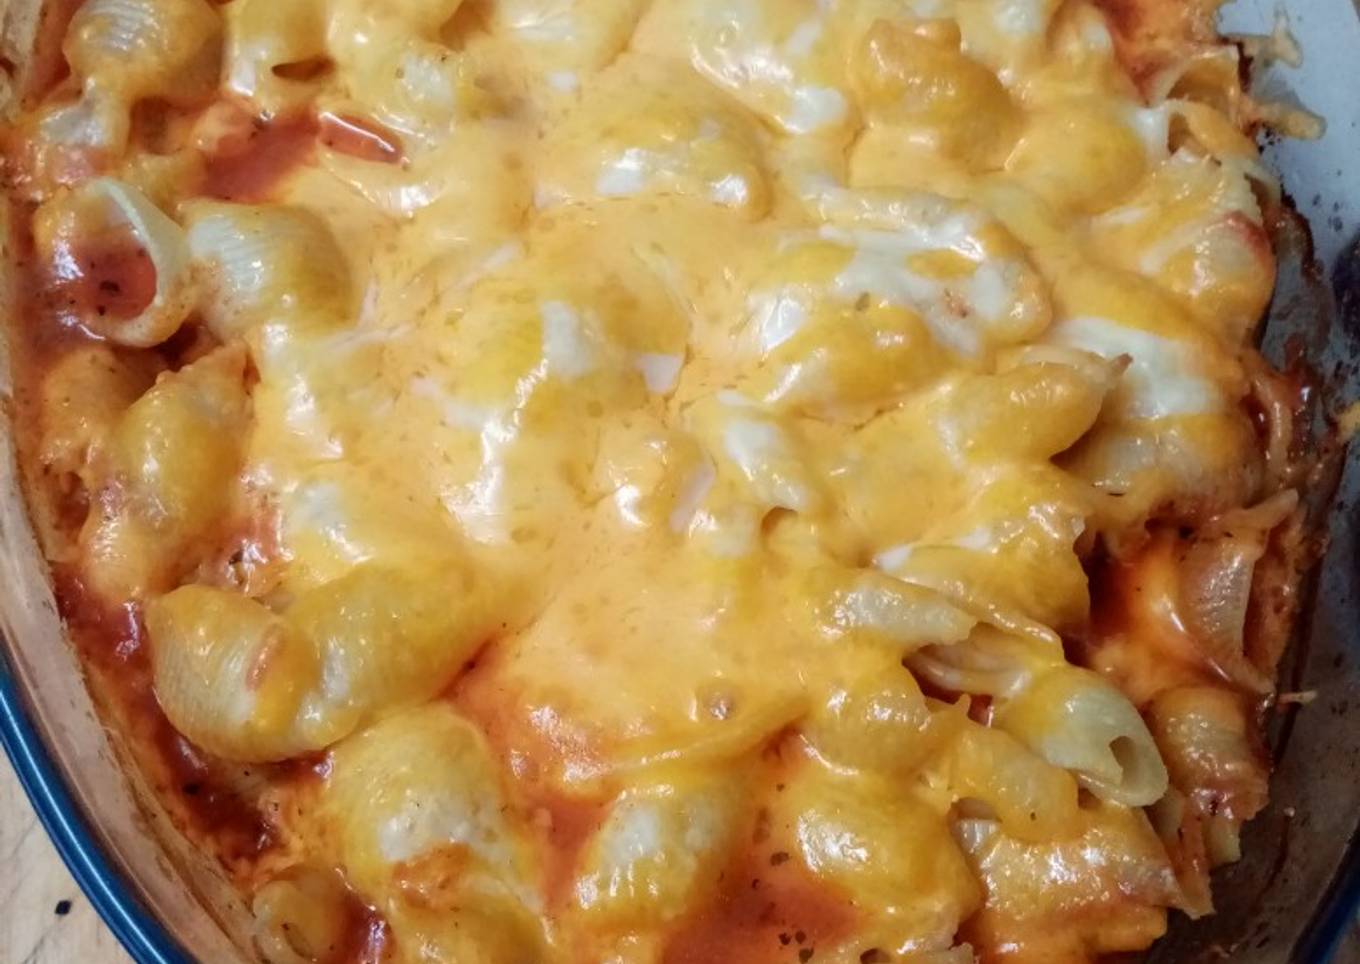 Cheese bake with a thingamajig